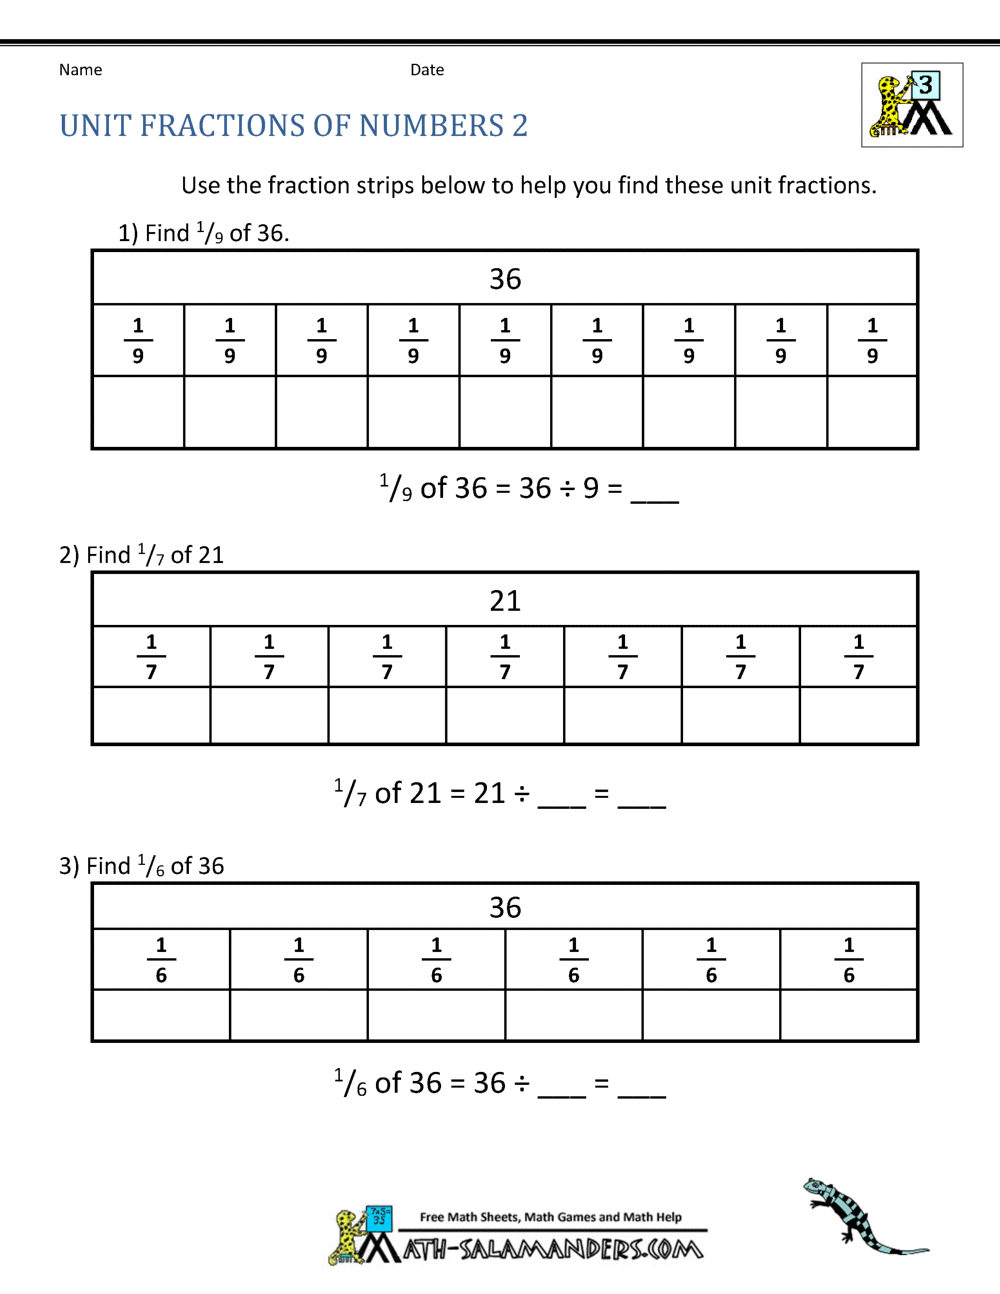 multiply-fractions-png